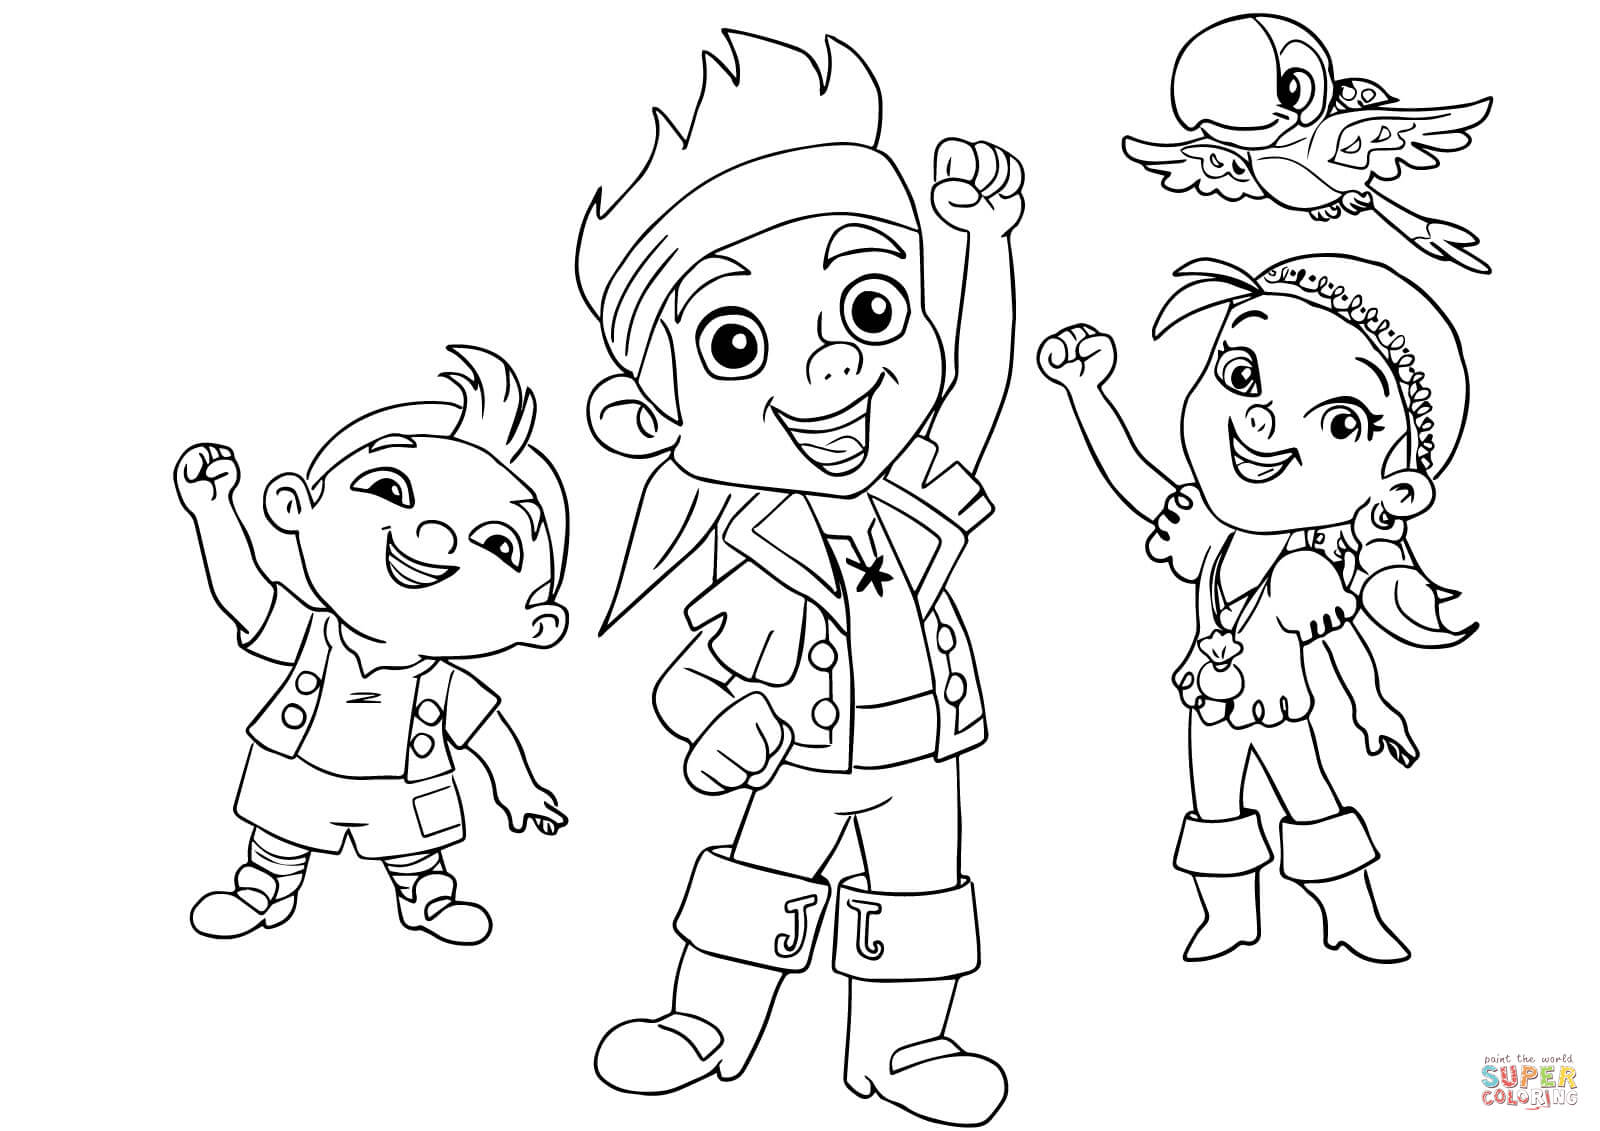 Jake, Izzy, Cubby, and Skully are Cheering Together coloring page ...